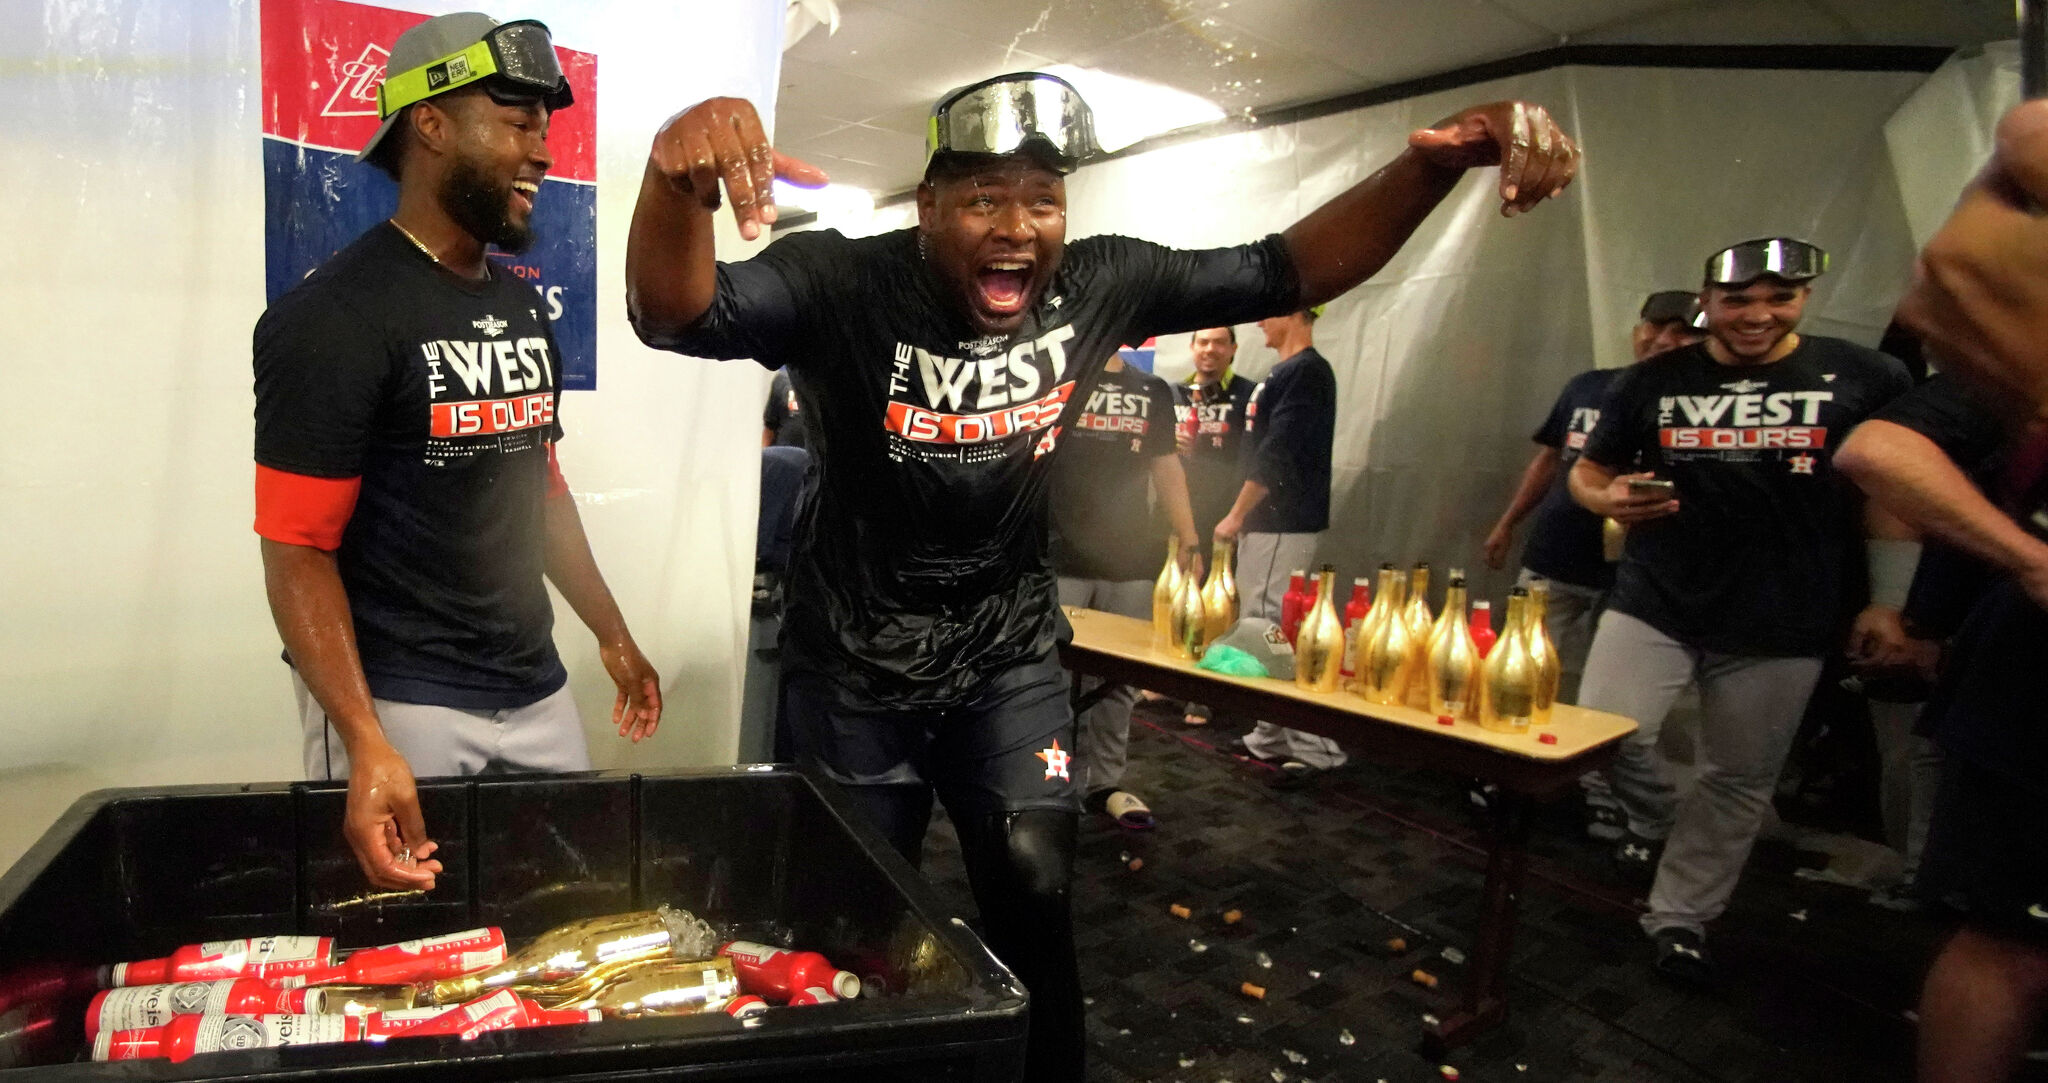 Houston Astros - Dress like a champion. Get your AL West Division